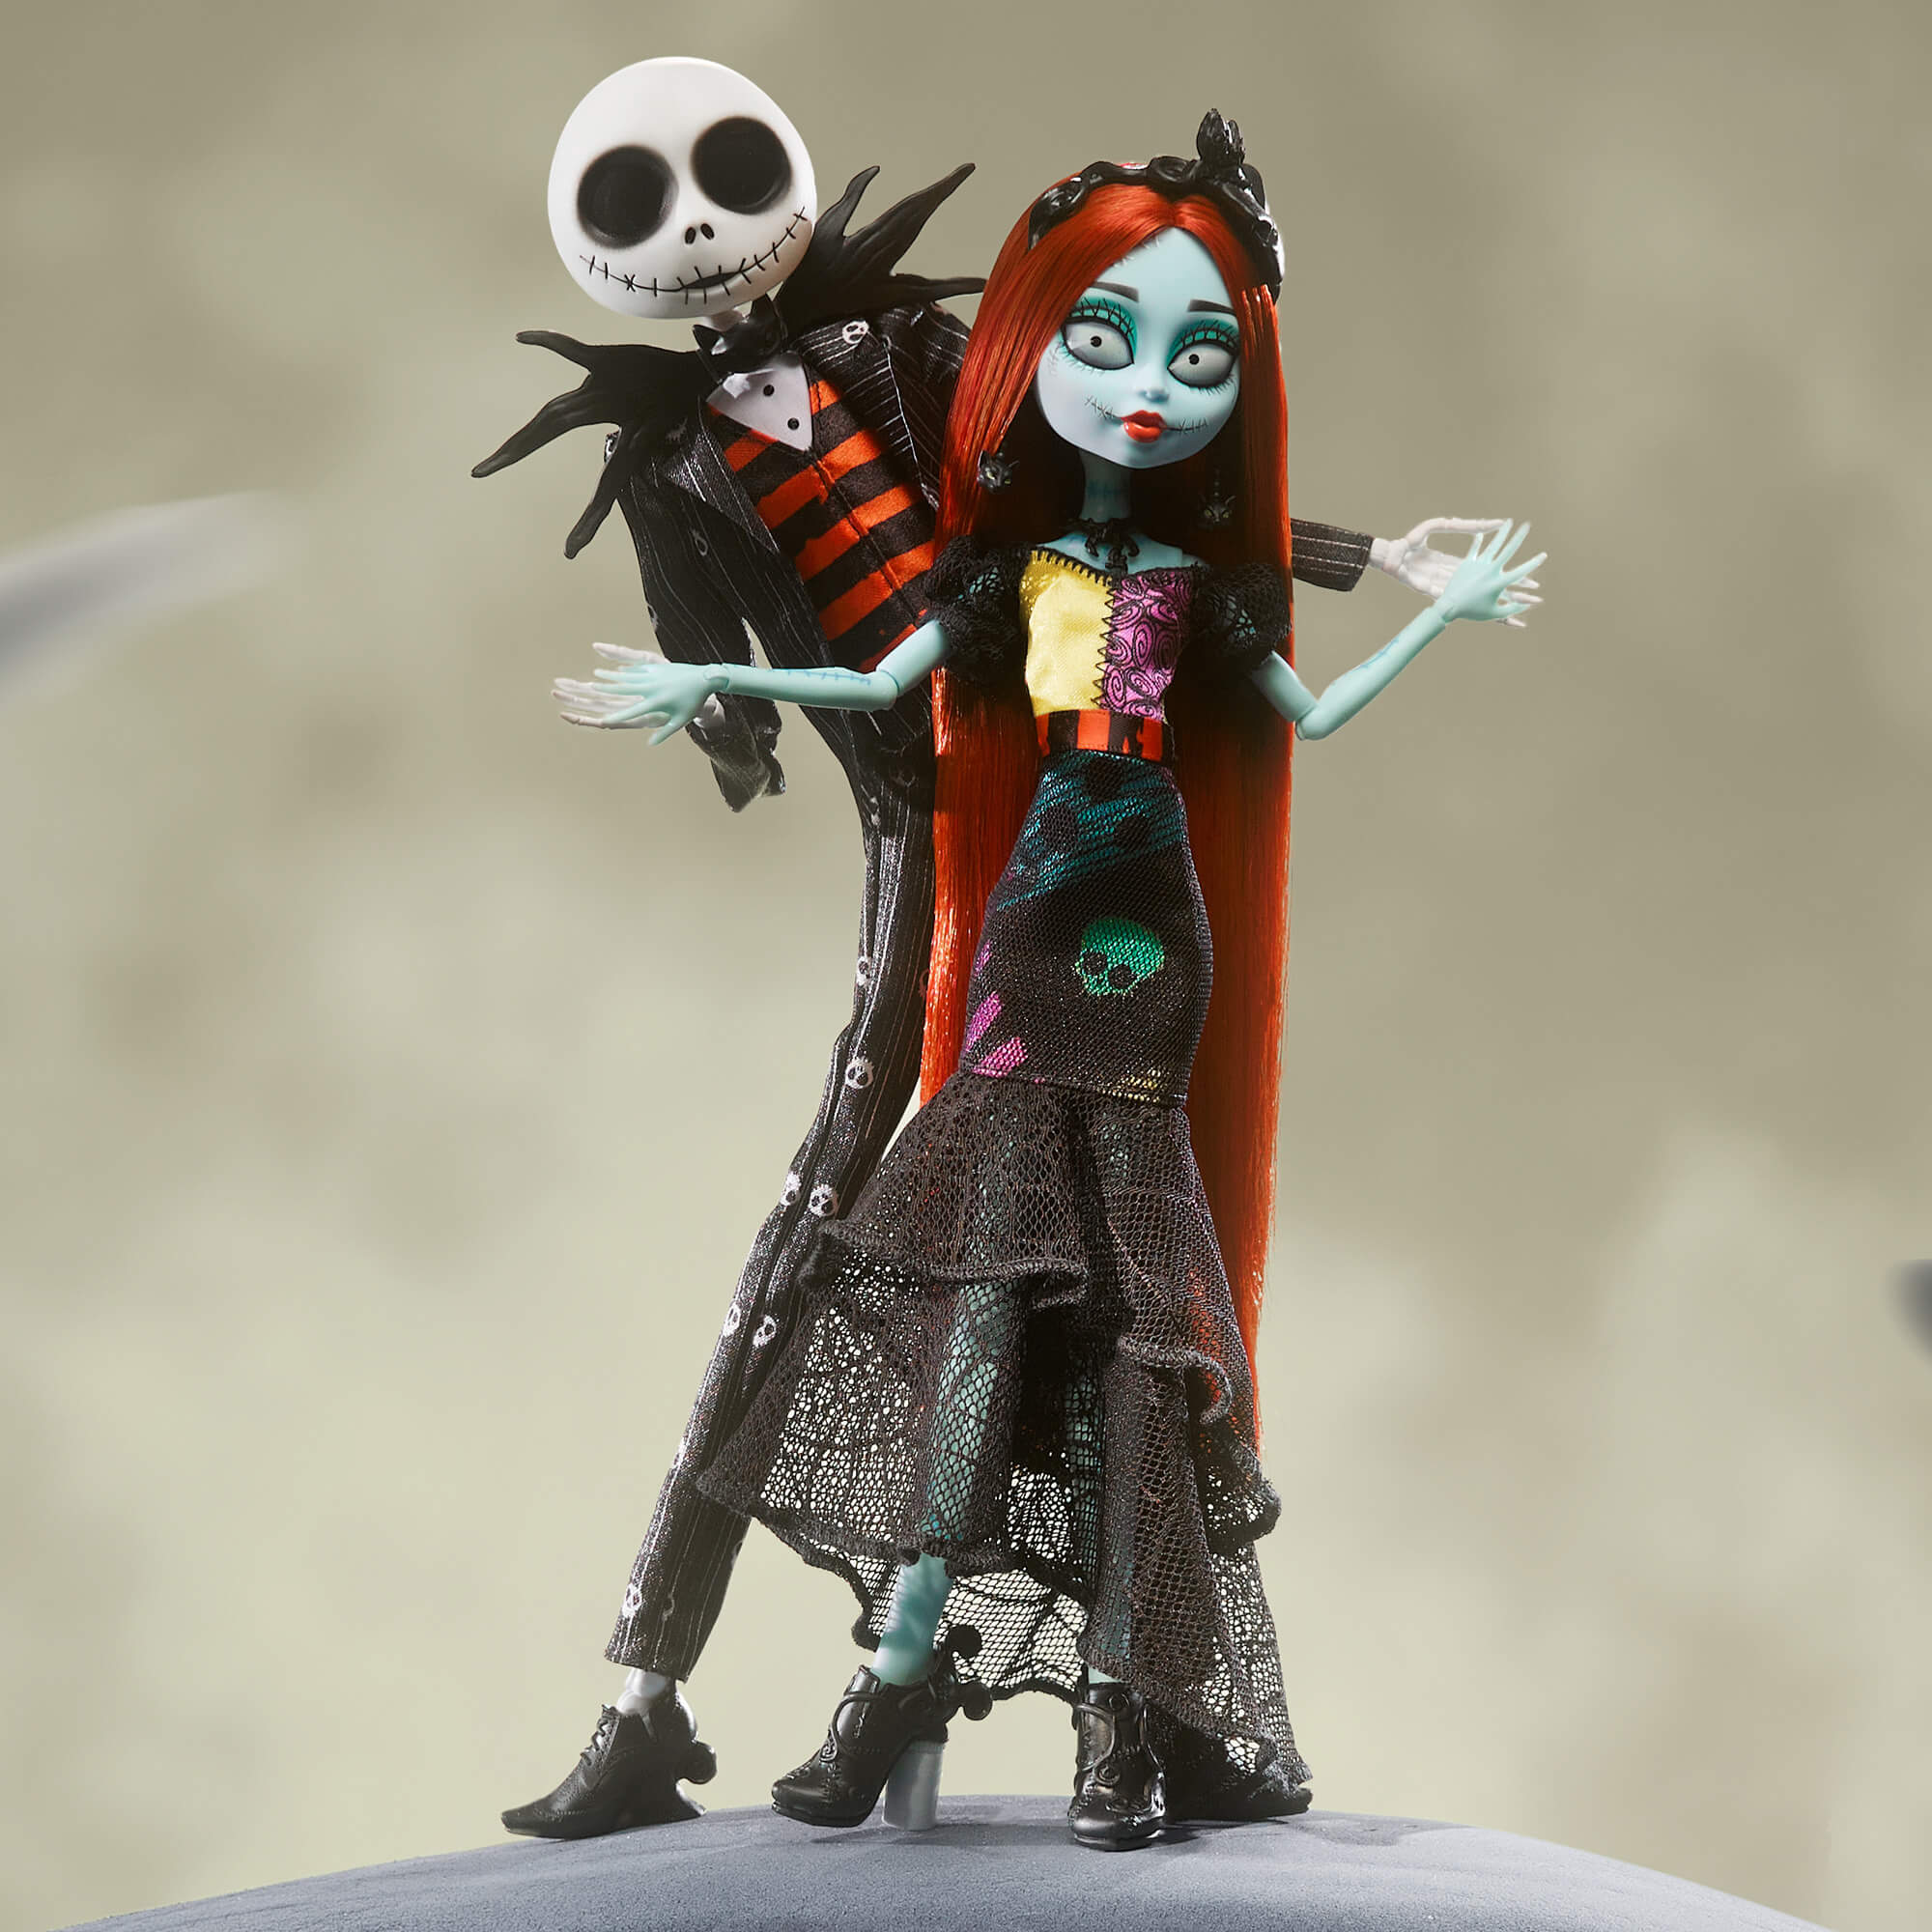 Monster High Drops a Huge Collection of New Dolls